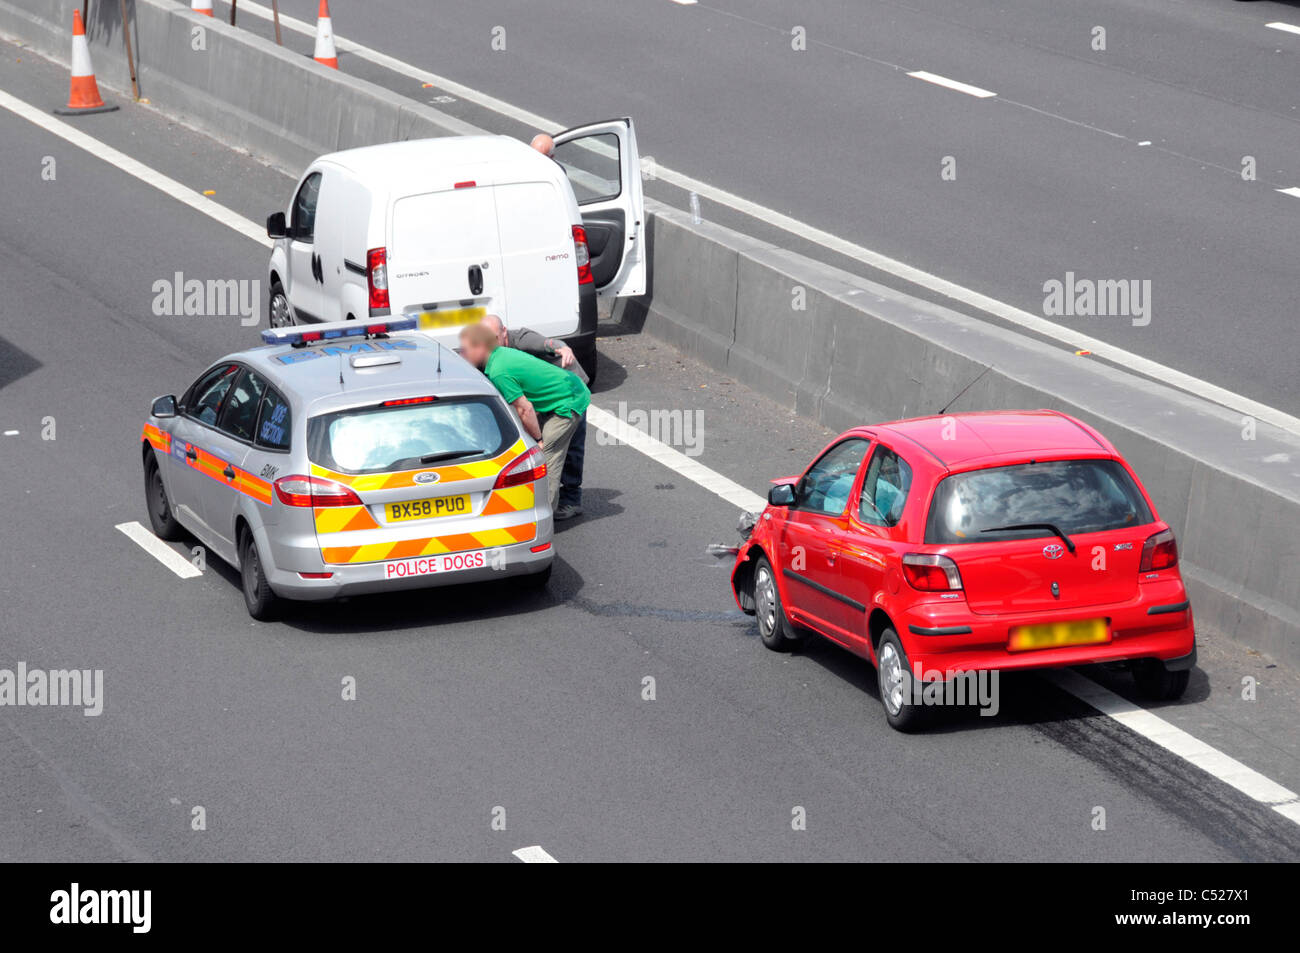 Aerial view UK motorway vehicles stationary in lane 4 accident involving red car below bridge witnesses talk to police beside concrete crash barrier Stock Photo